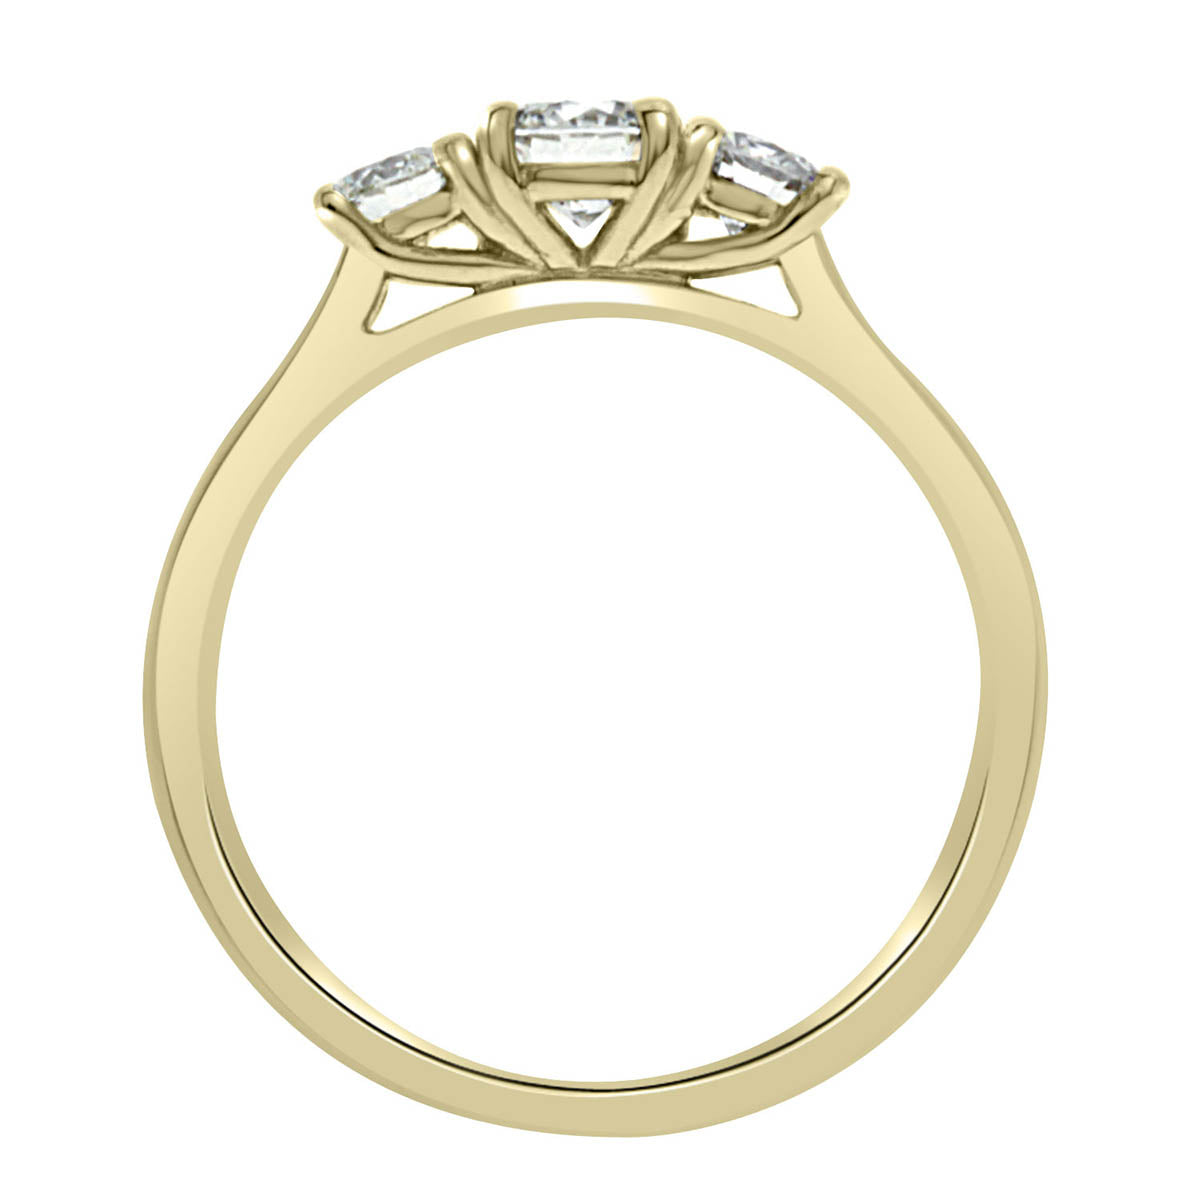 Trilogy Engagement Ring made in yellow gold upright standing